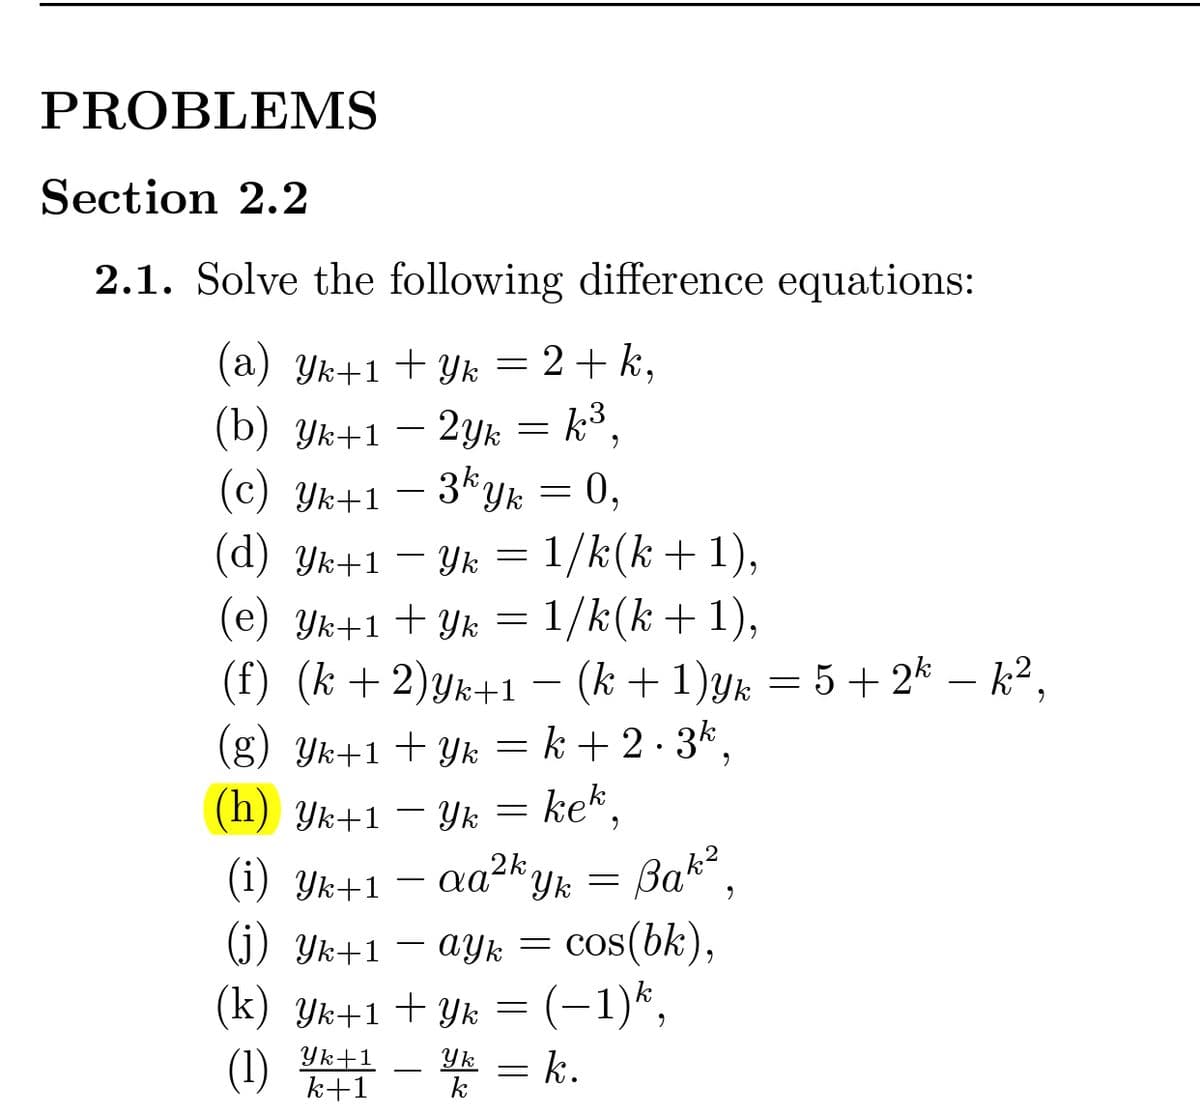 PROBLEMS
Section 2.2
2.1. Solve the following difference equations:
(a) Yk+1+ Yk = 2+ k,
(b) Yk+1 – 2yk = k³,
(c) Yk+1
-
3kyk = 0,
(d) Yk+1 – Yk = 1/k(k+1),
(e) Yk+1+ Yk = 1/k(k+1),
(f) (k +2)yk+1 – (k +1)yk = 5+ 2k – k²,
-
(g) Yk+1 + Yk = k + 2 · 3k,
kek,
(h) Yk+1 – Yk =
Bak?
(j) Yk+1 – ayk = cos(bk),
(k) Yk+1 +Yk = (-1)k,
* = k.
(i) Yk+1
(1)
Yk+1
k+1
